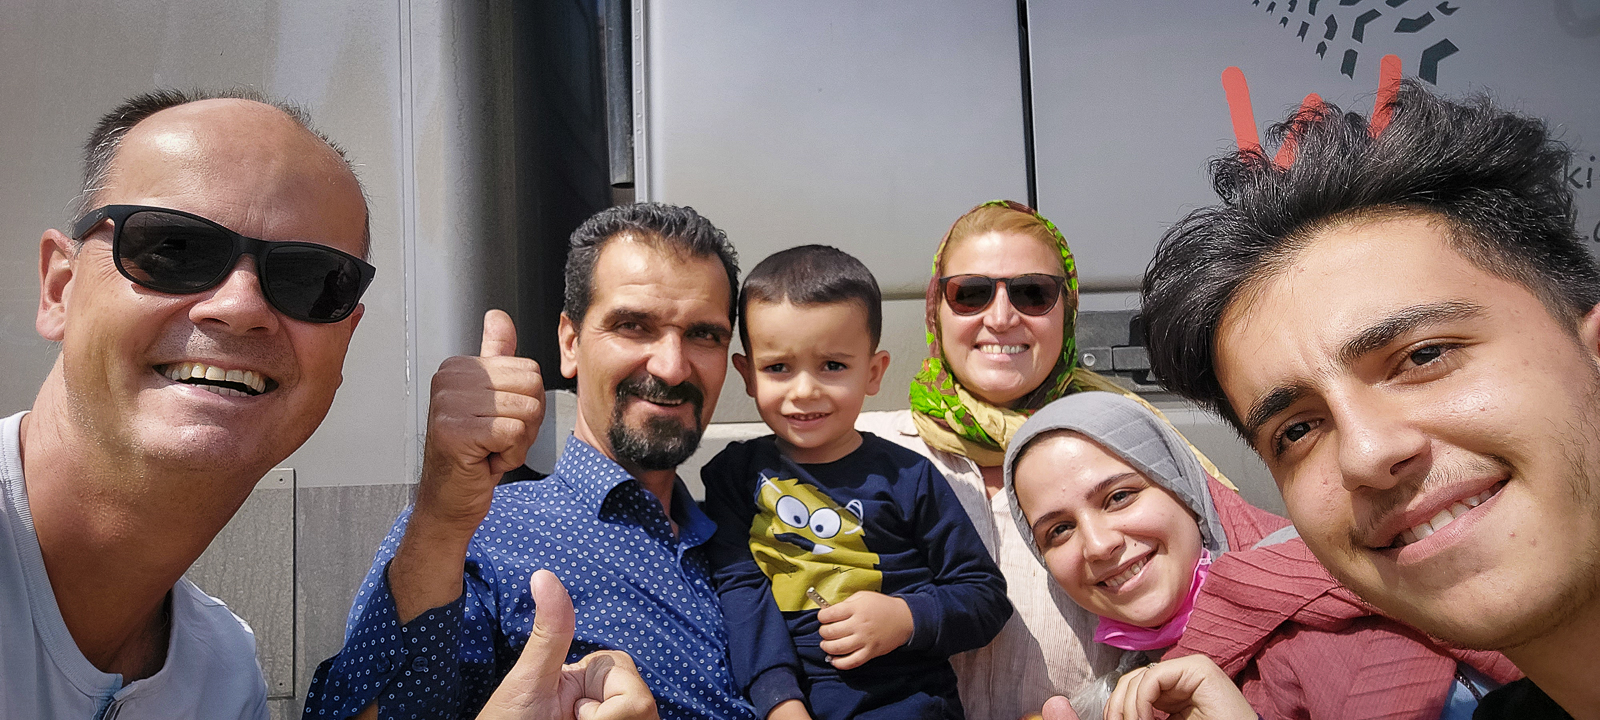 <span  class="uc_style_uc_tiles_grid_image_elementor_uc_items_attribute_title" style="color:#ffffff;">This family 'stopped' us on the highway just to say hello and to welcome us in Iran</span>